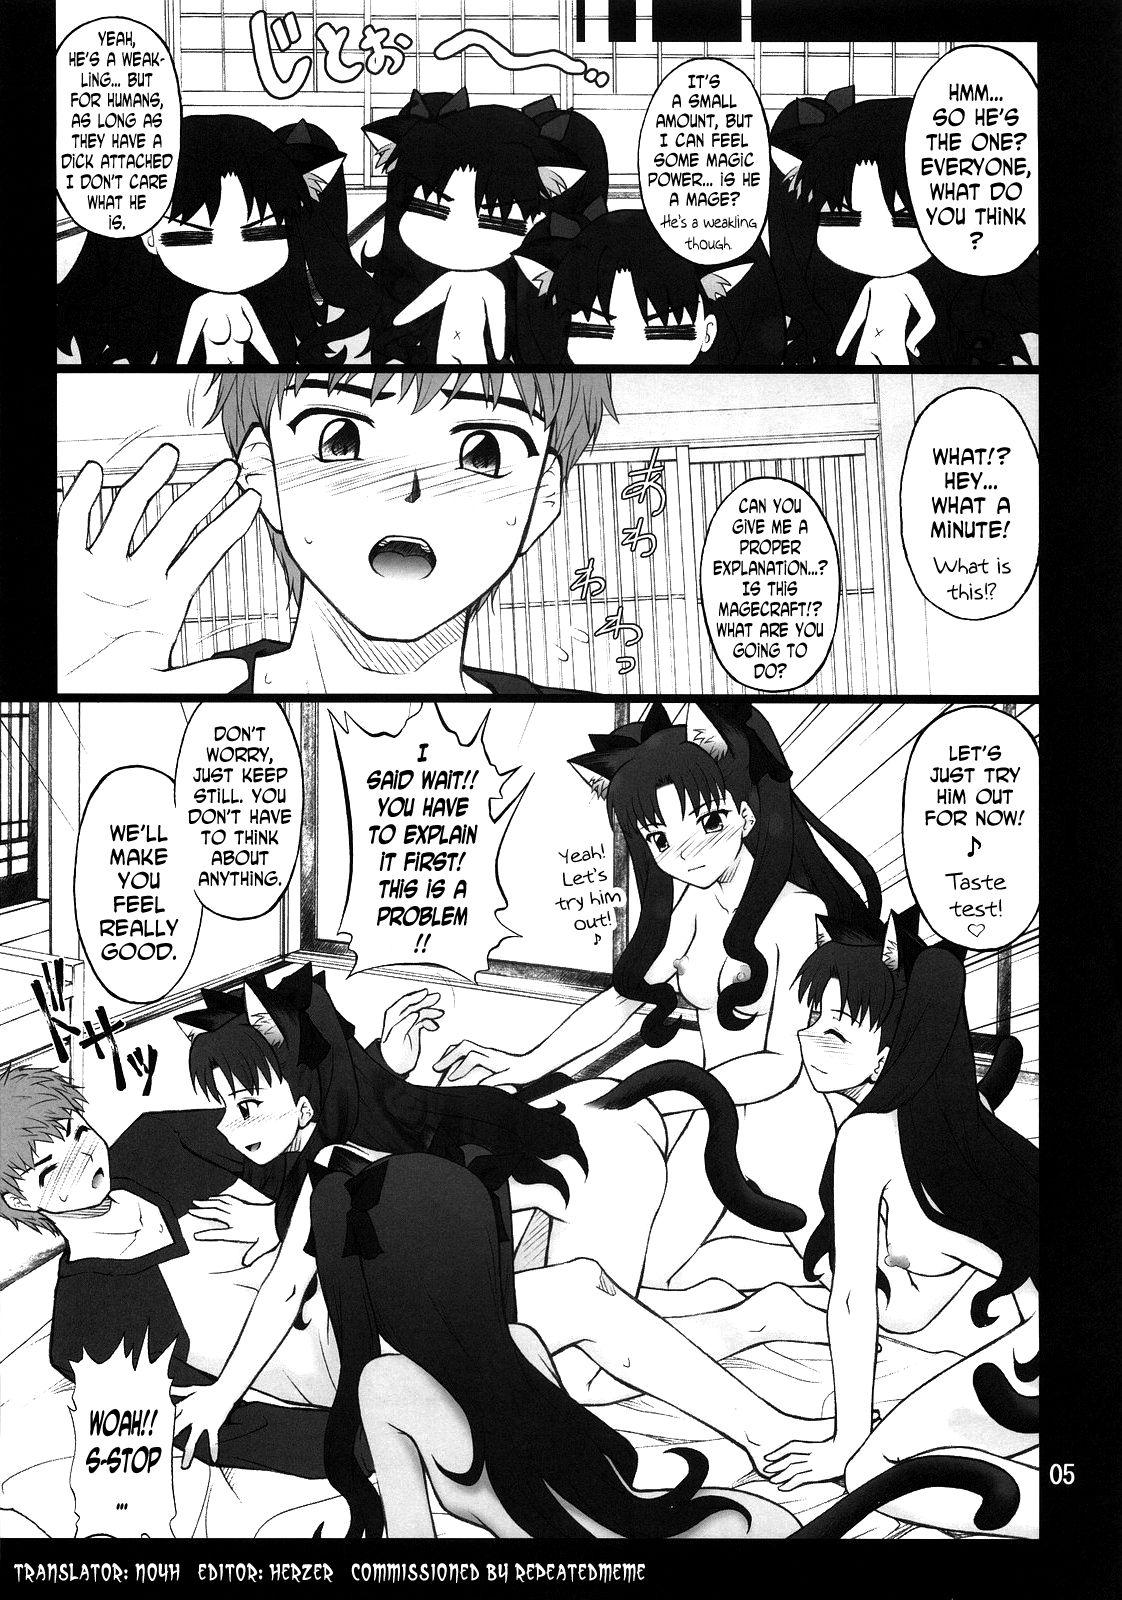 Strap On Grem-Rin 2 - Fate stay night Smalltits - Page 4